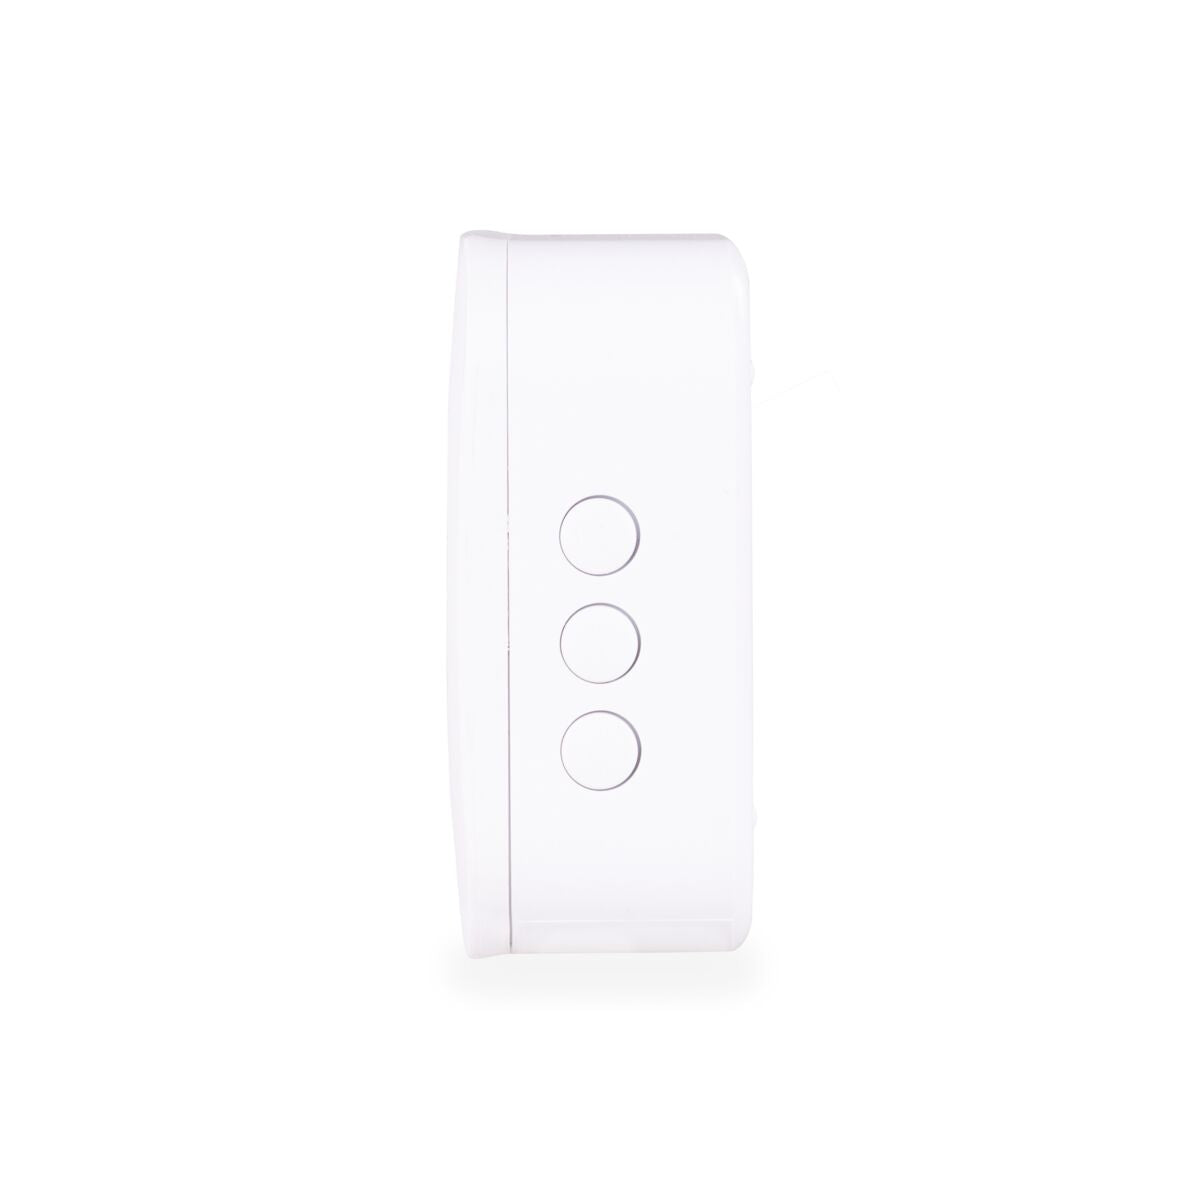 Bell ME WHT - Wireless chime -  Chime for Buzz LO - 80m